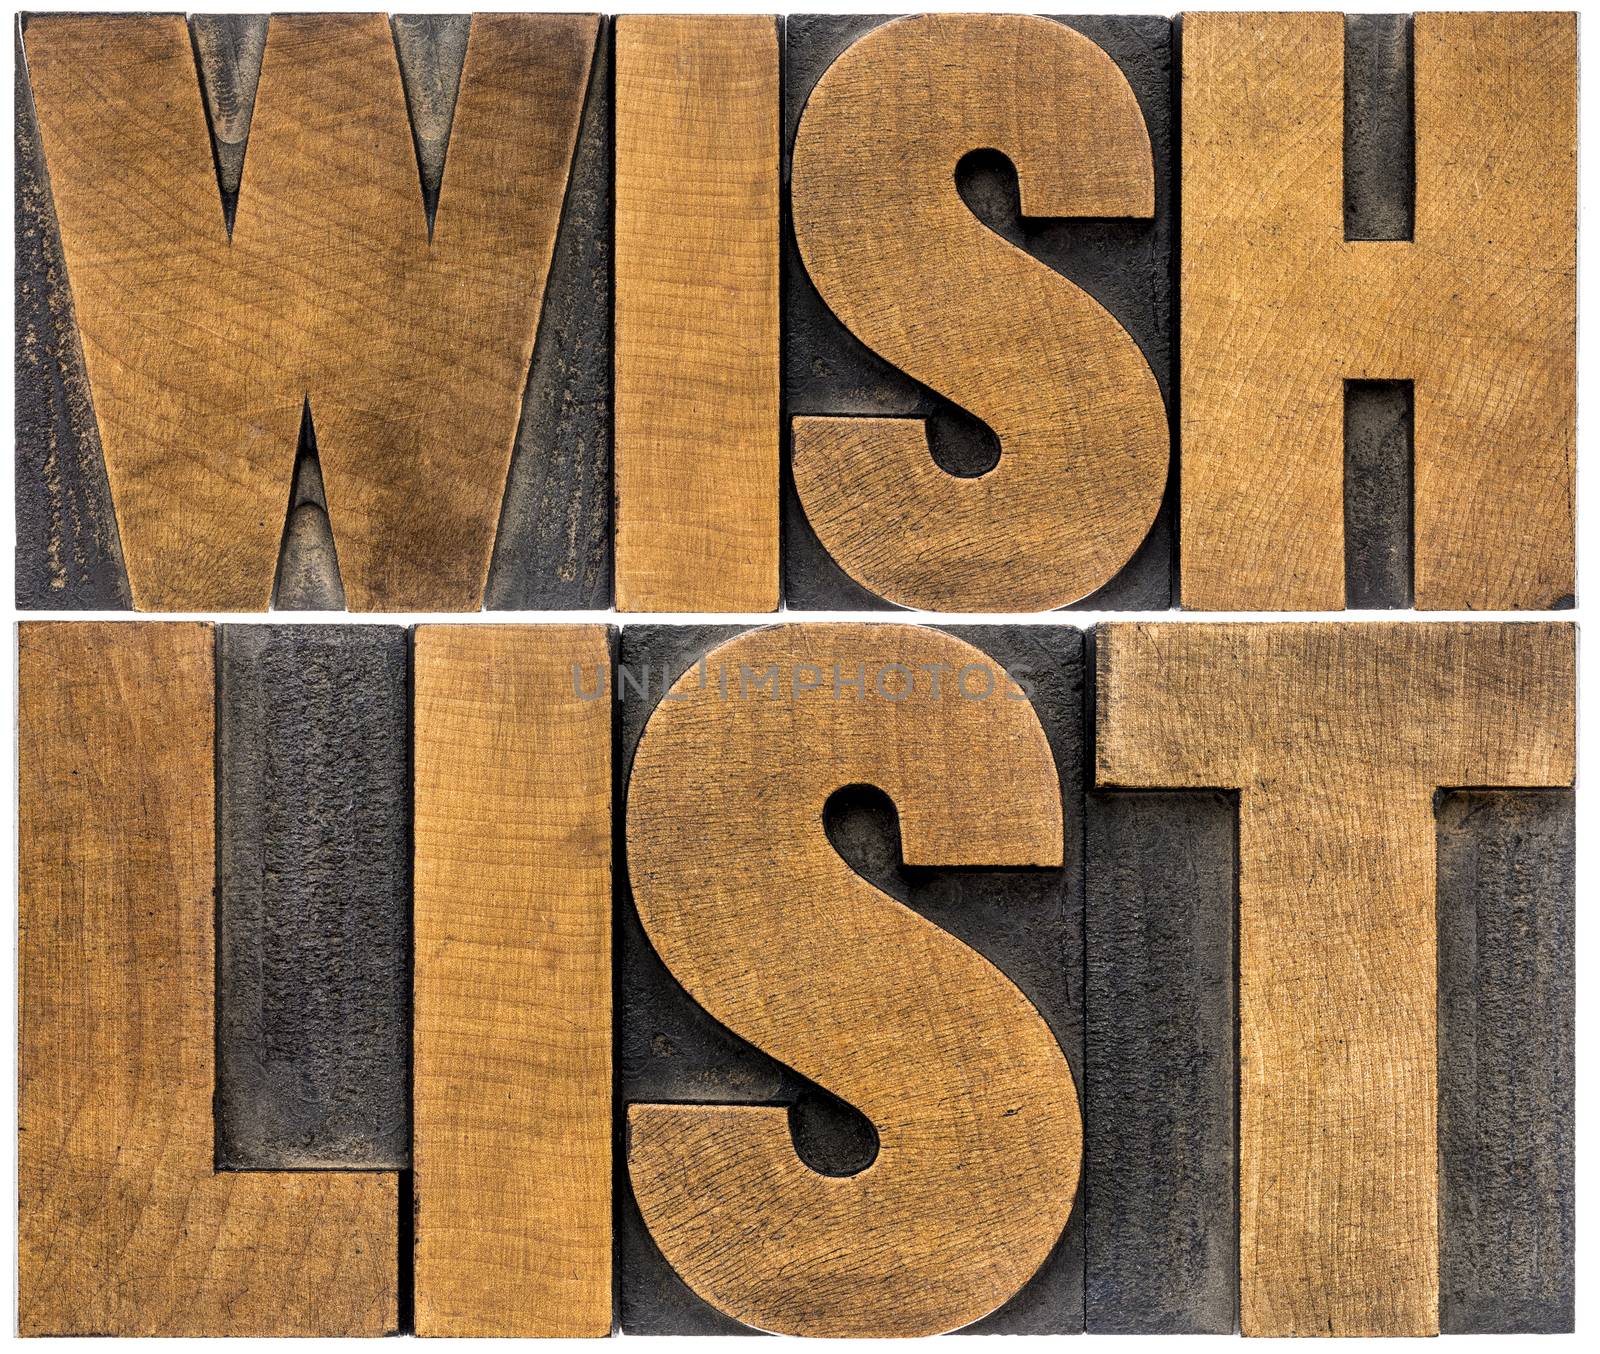 wish list word abstract typography - isolated text in letterpress wood type